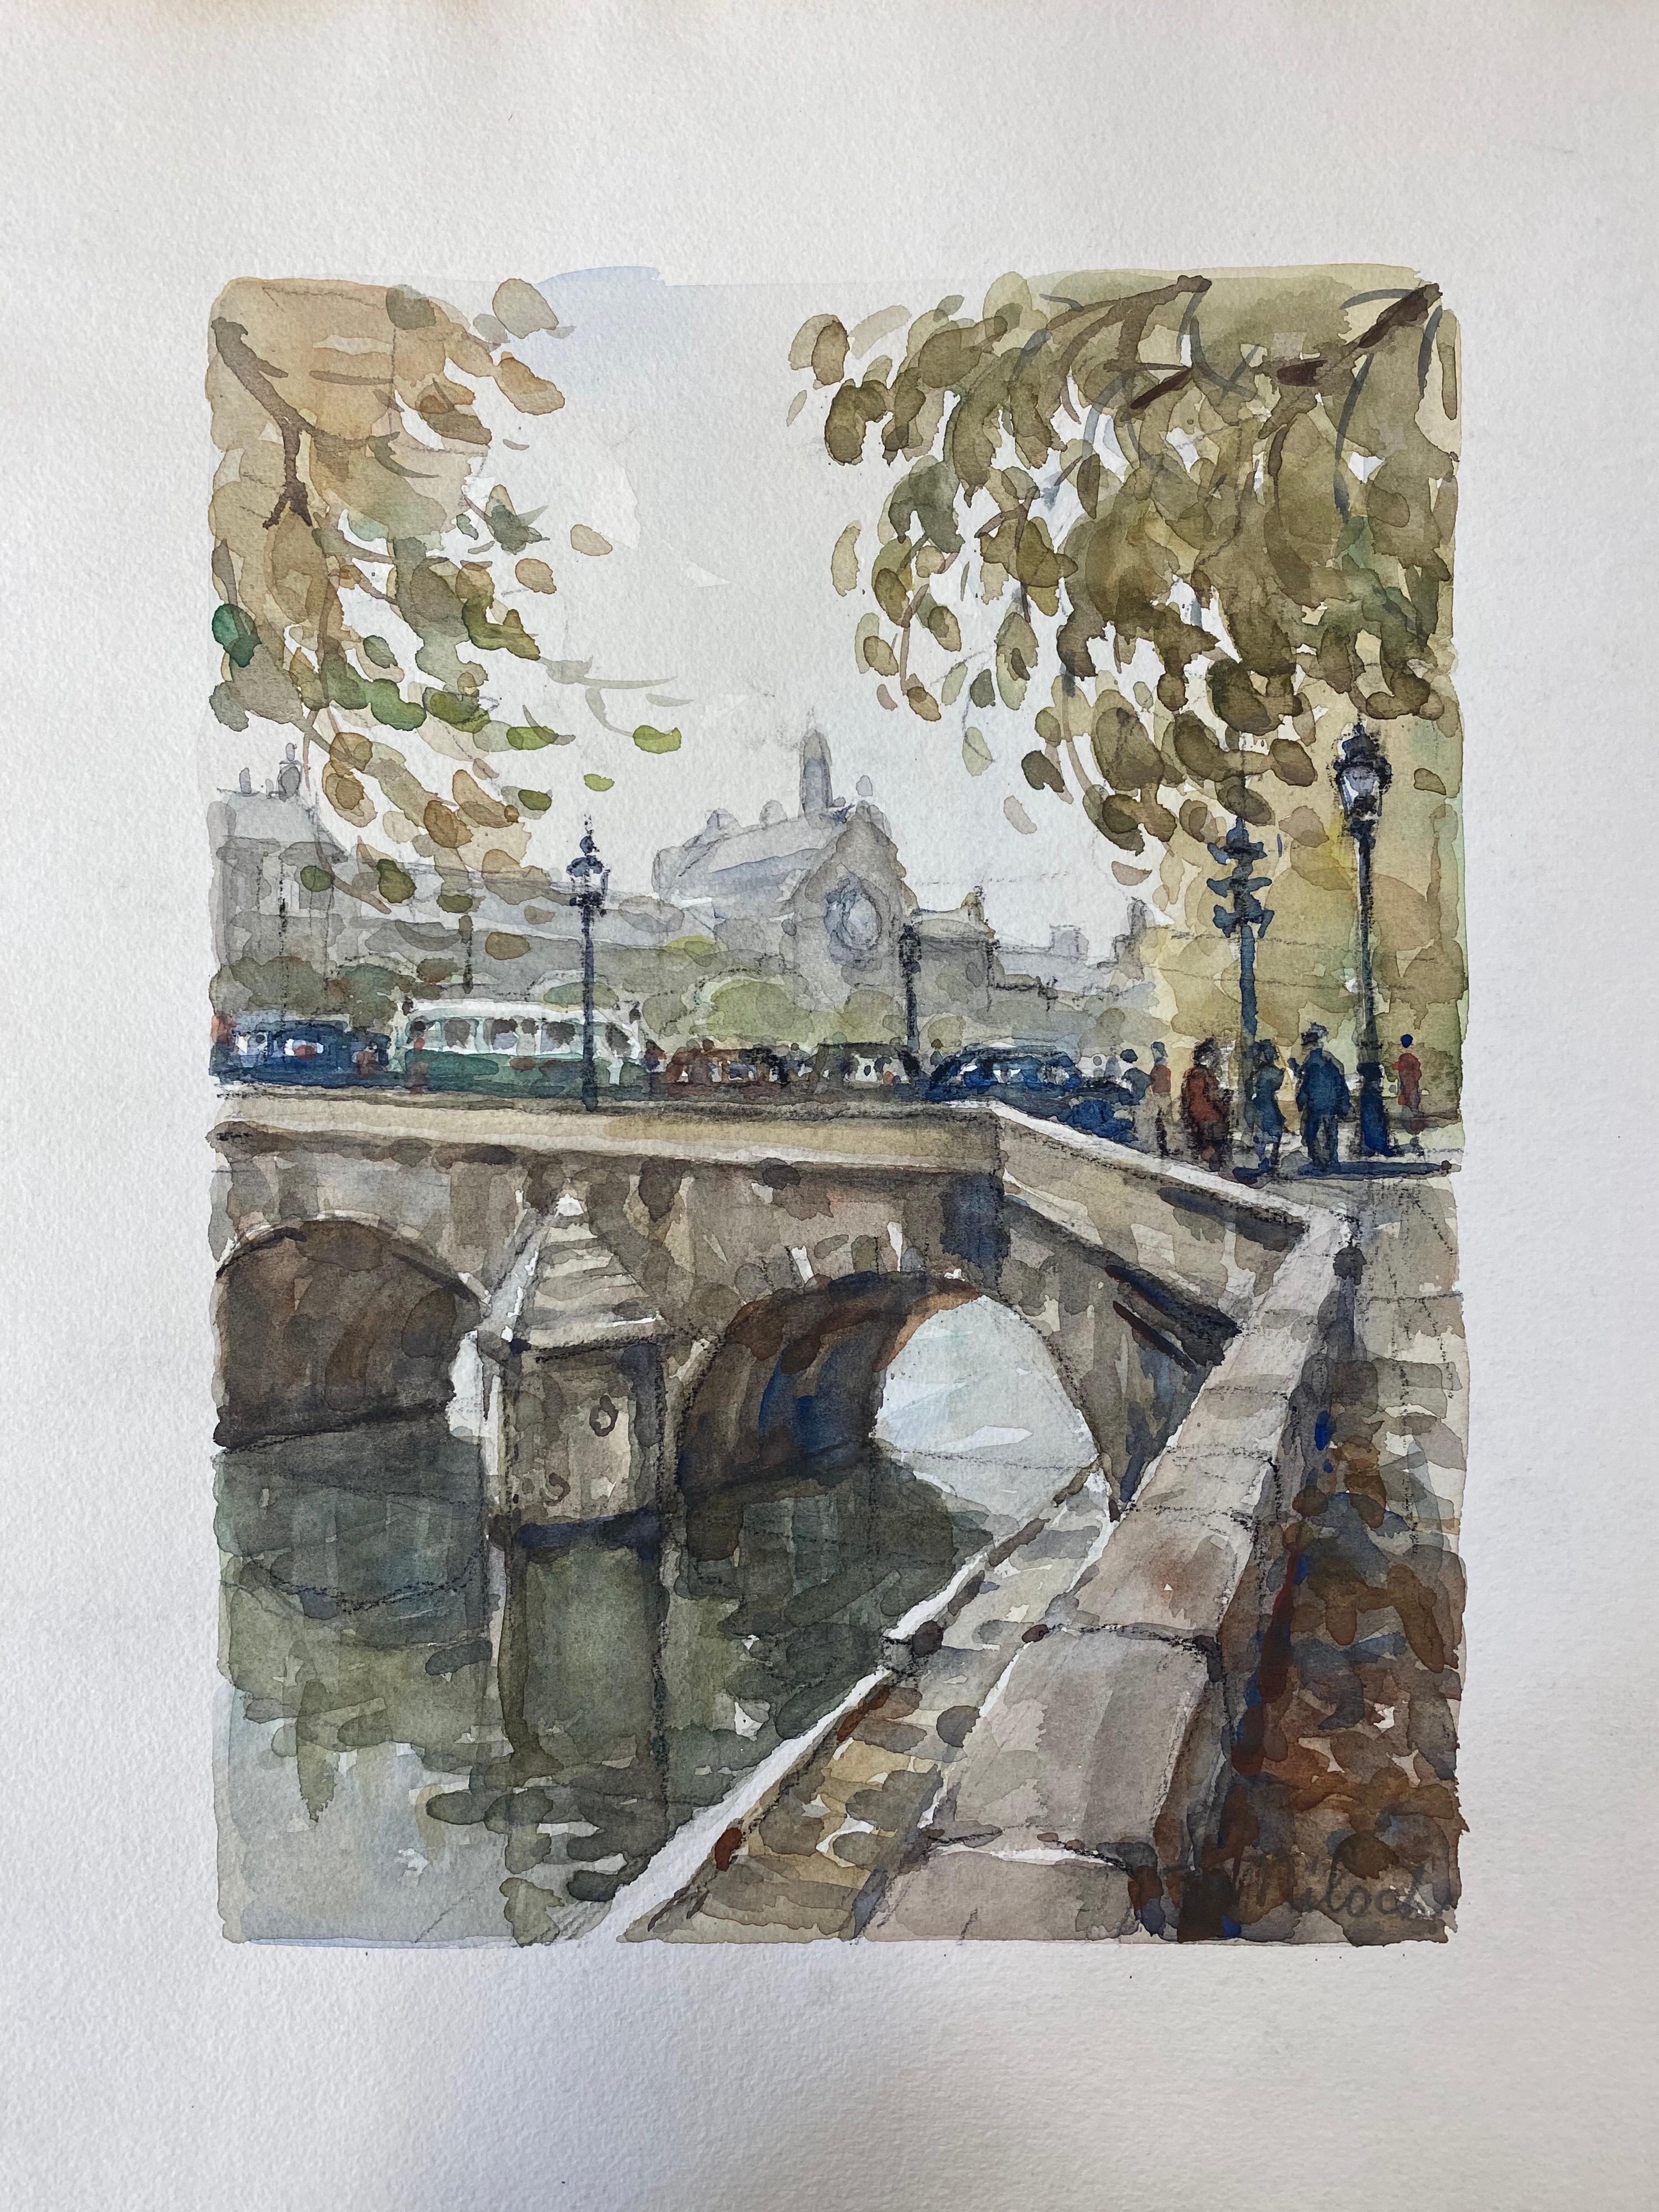 Paris, France
by Henri Miloch (1898-1979)
Signed
Watercolour and gouache painting on artist's paper, unframed.

Sheet 9.5 x 12.5 inches.

Nicely executed study over the River Seine in Paris. Painted from a high position on a bridge by the